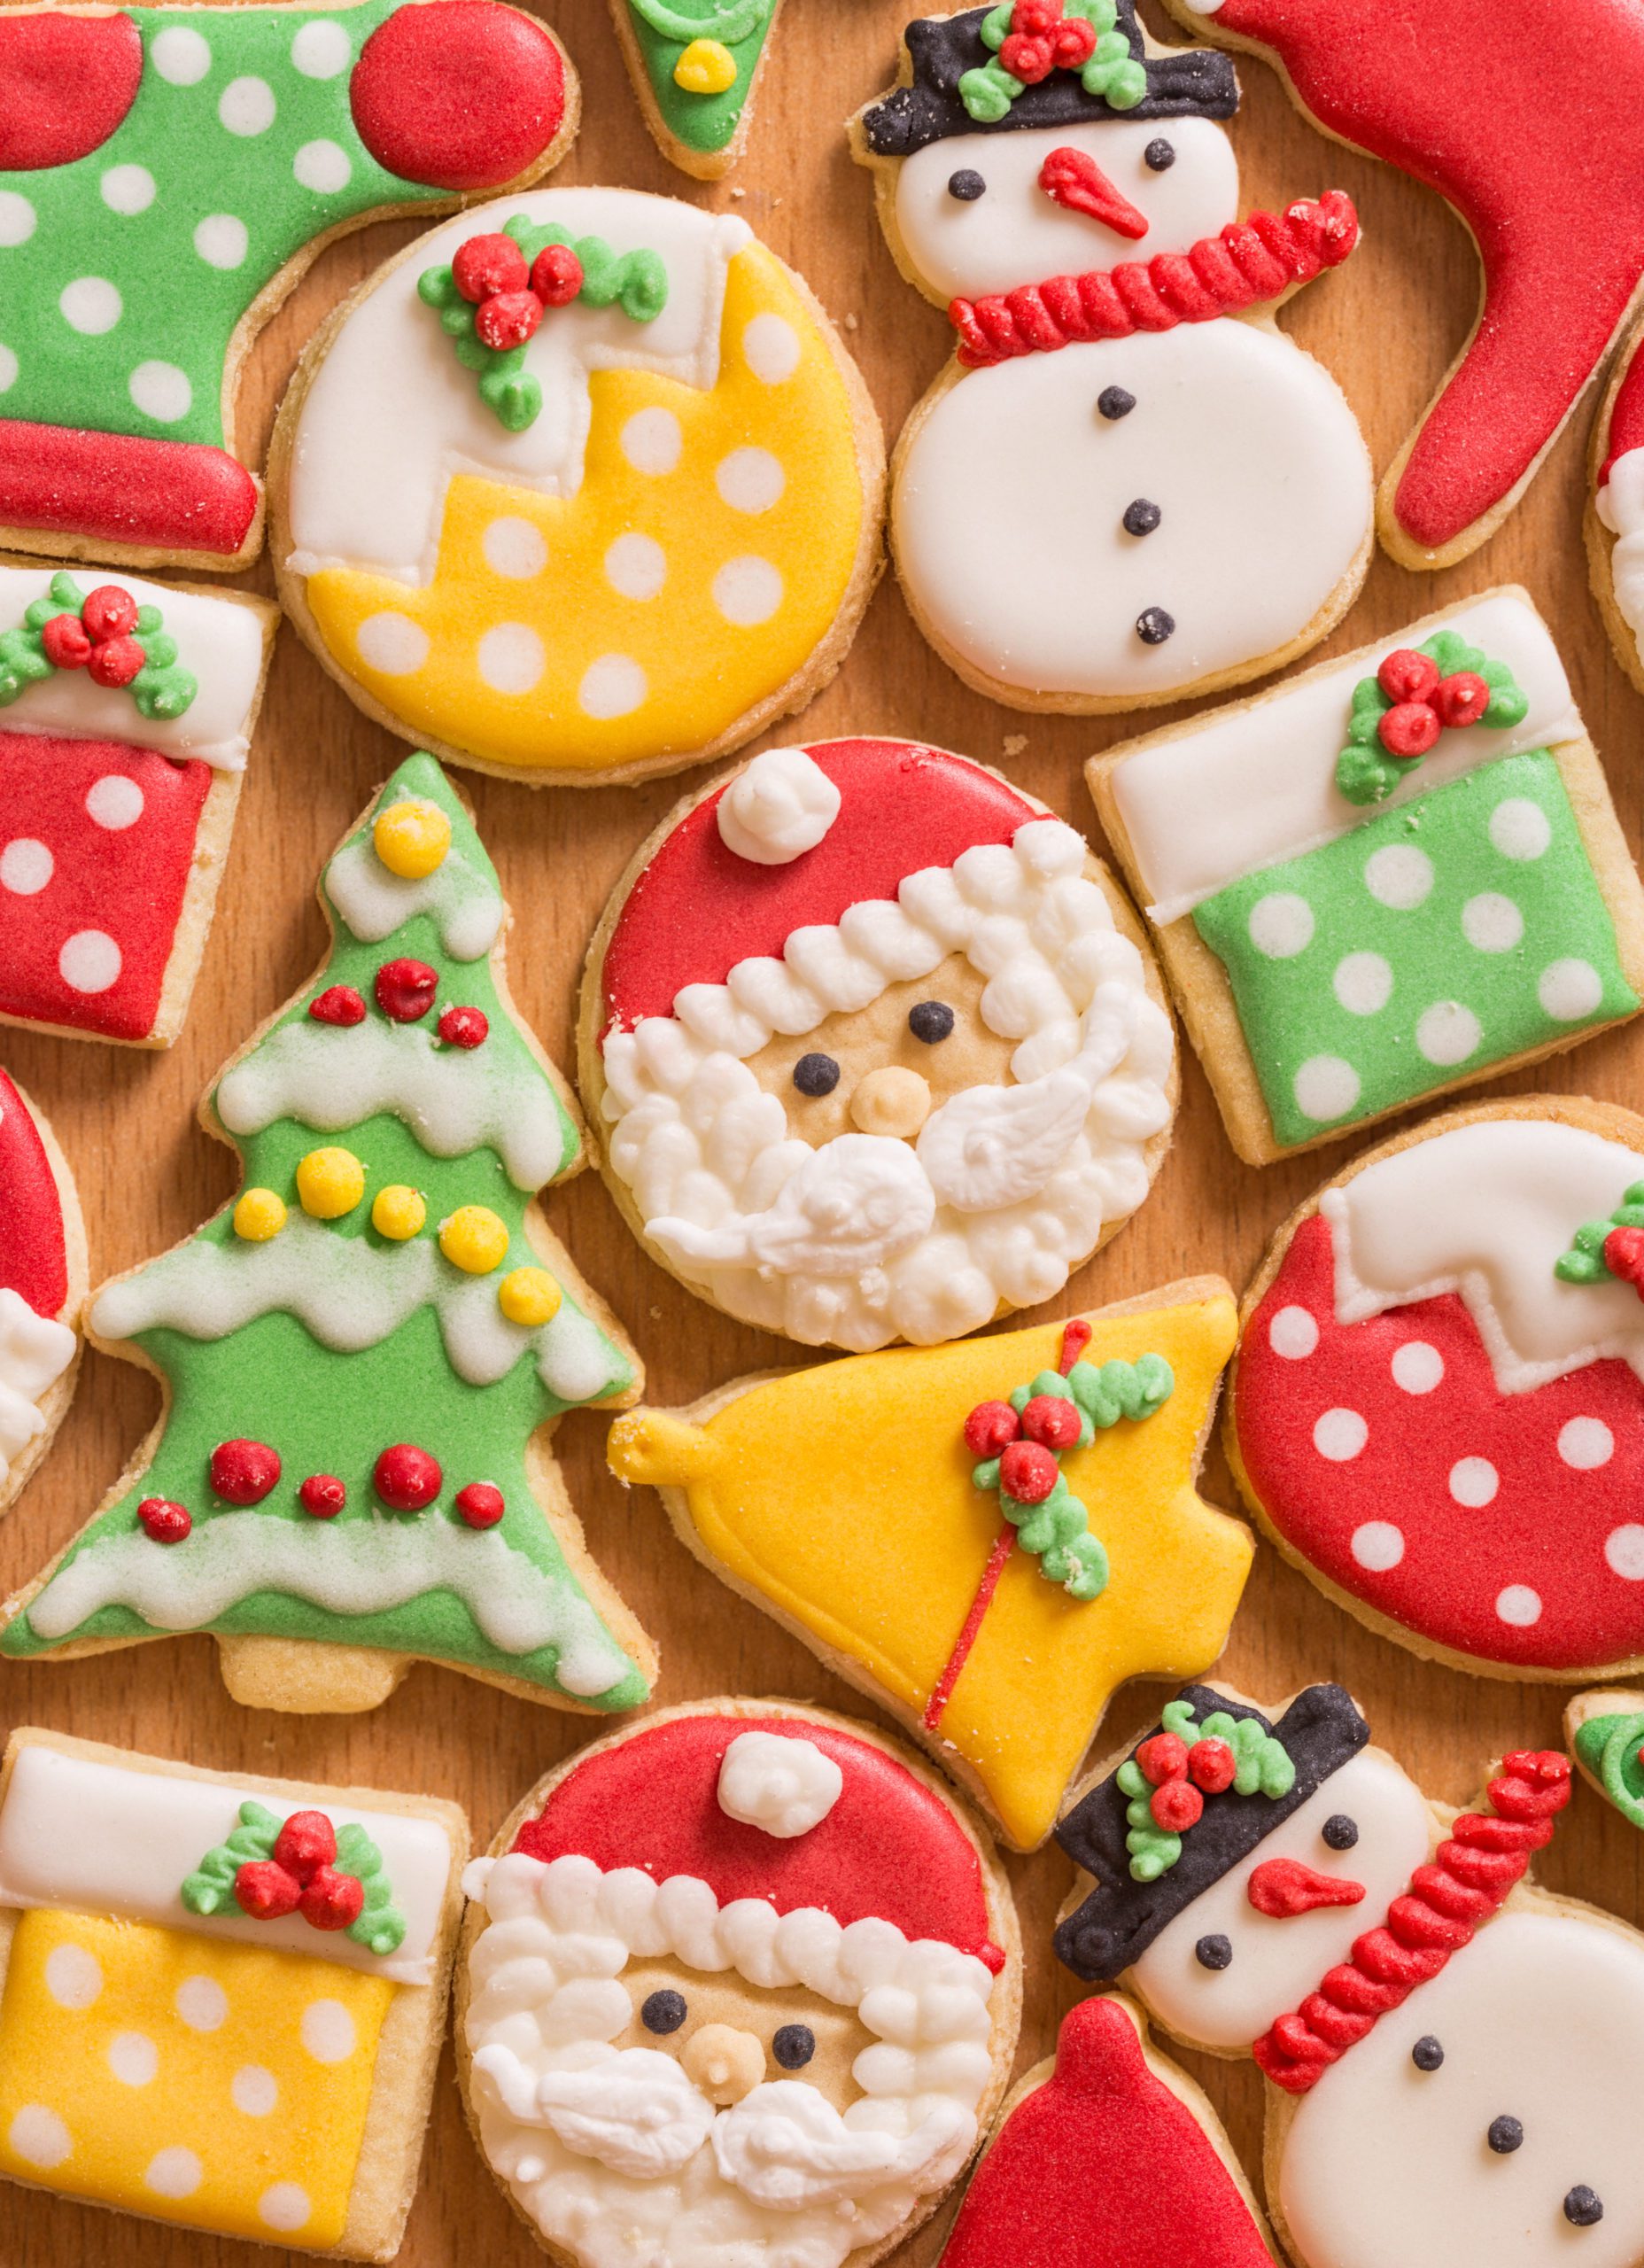 7 Cookies Kids Can Make (With a Little Help)